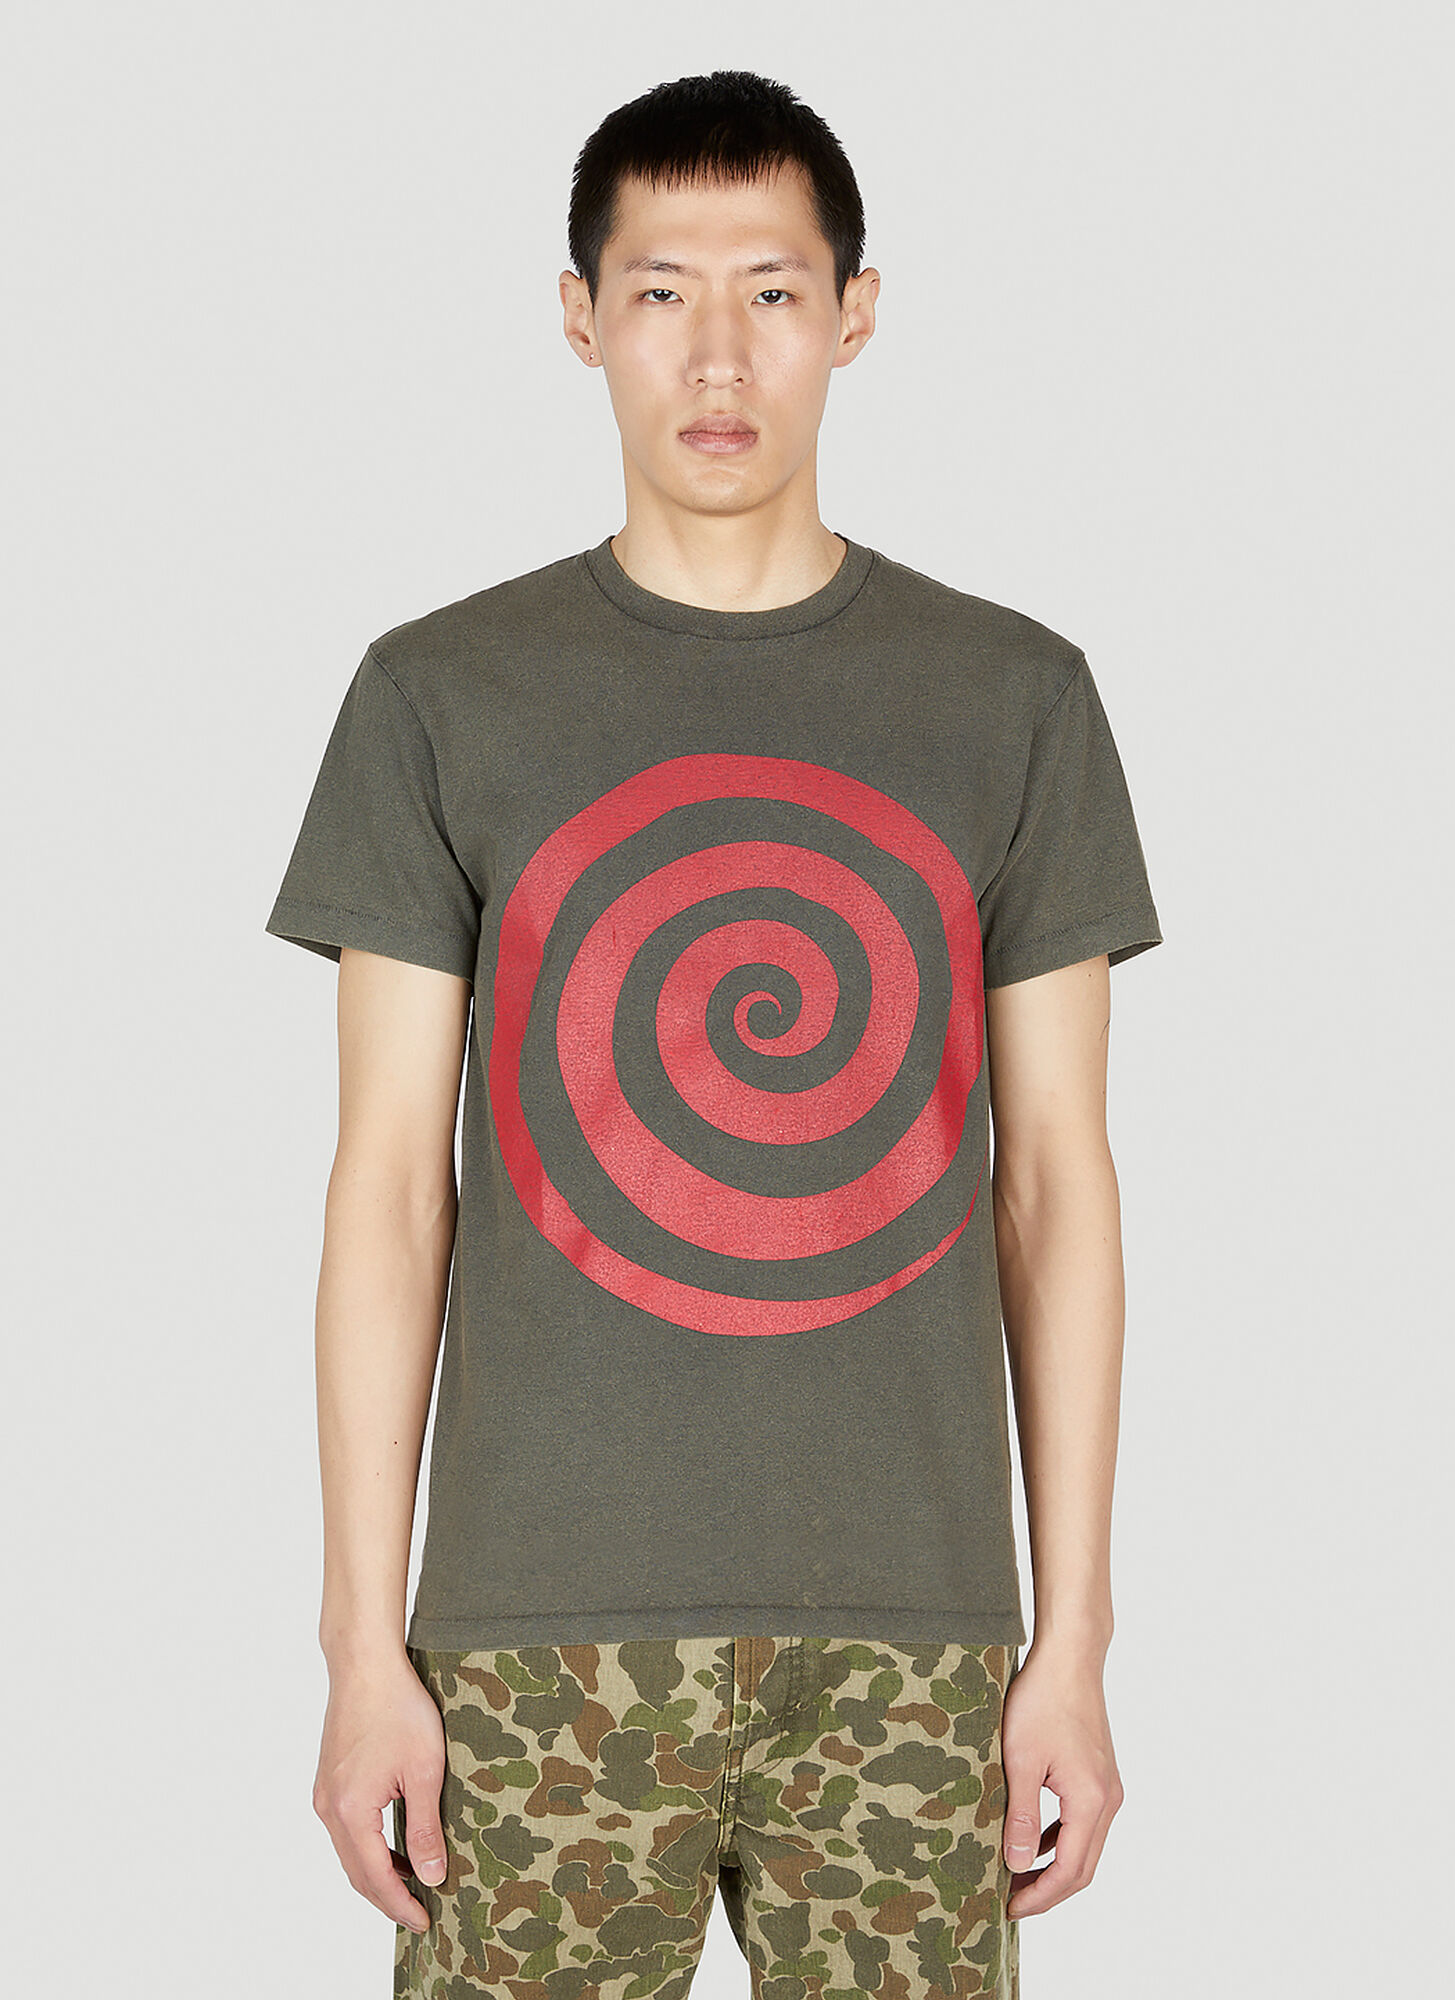 Gallery Dept. Lost Prevention T-shirt Male Grey